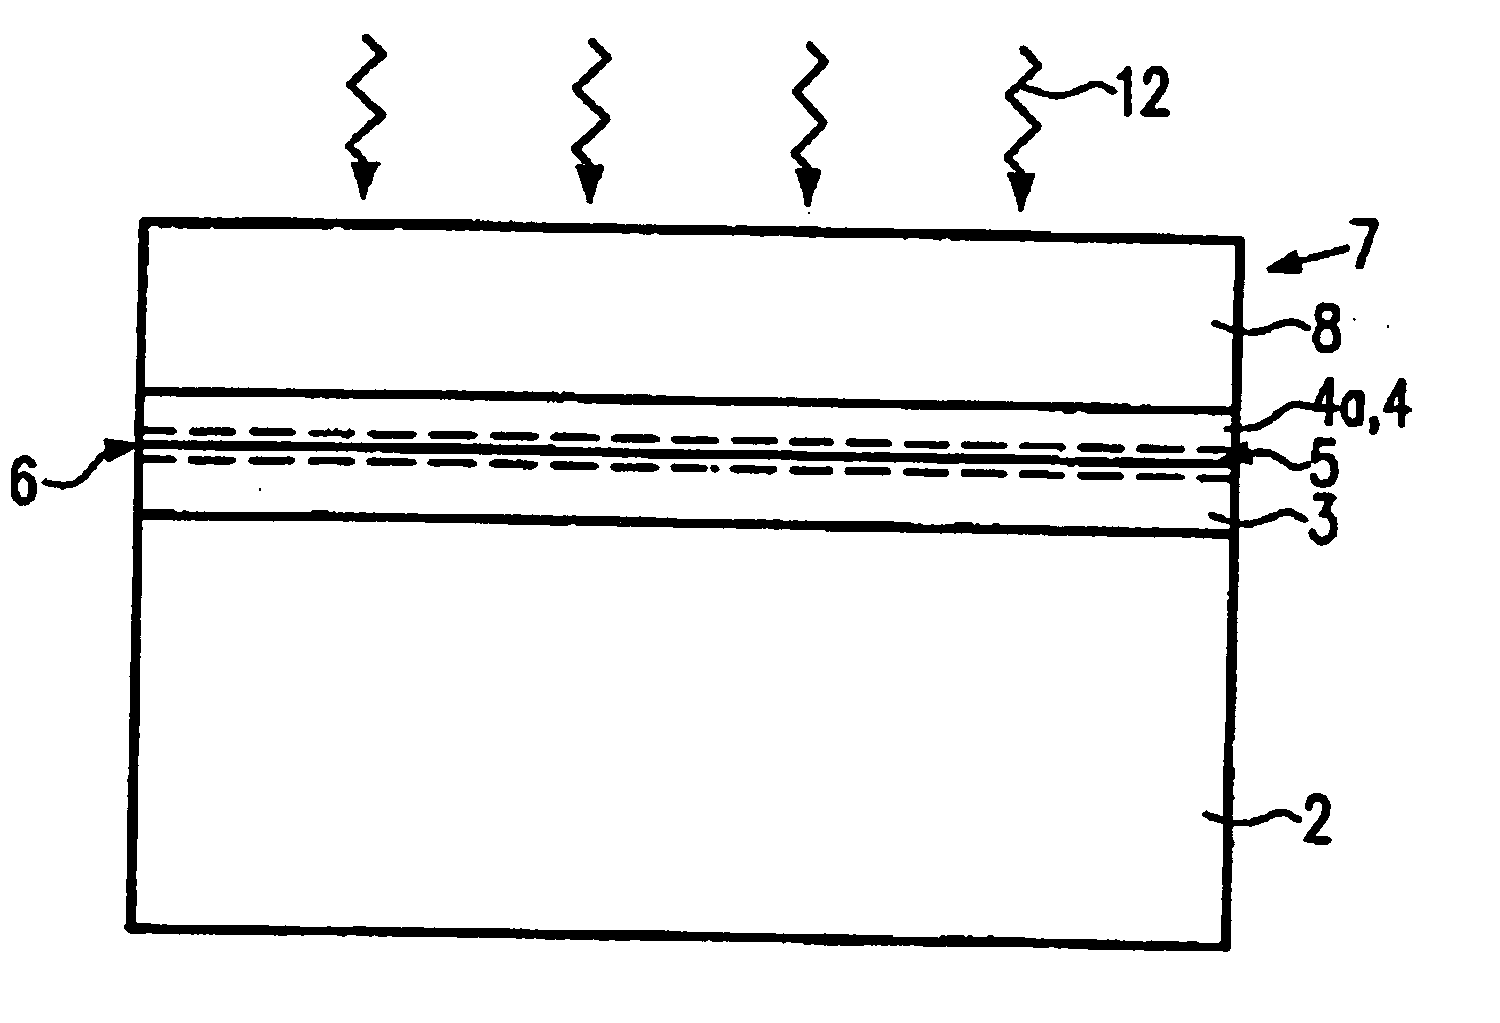 Compliant substrate for a heteroepitaxial structure and method for making same